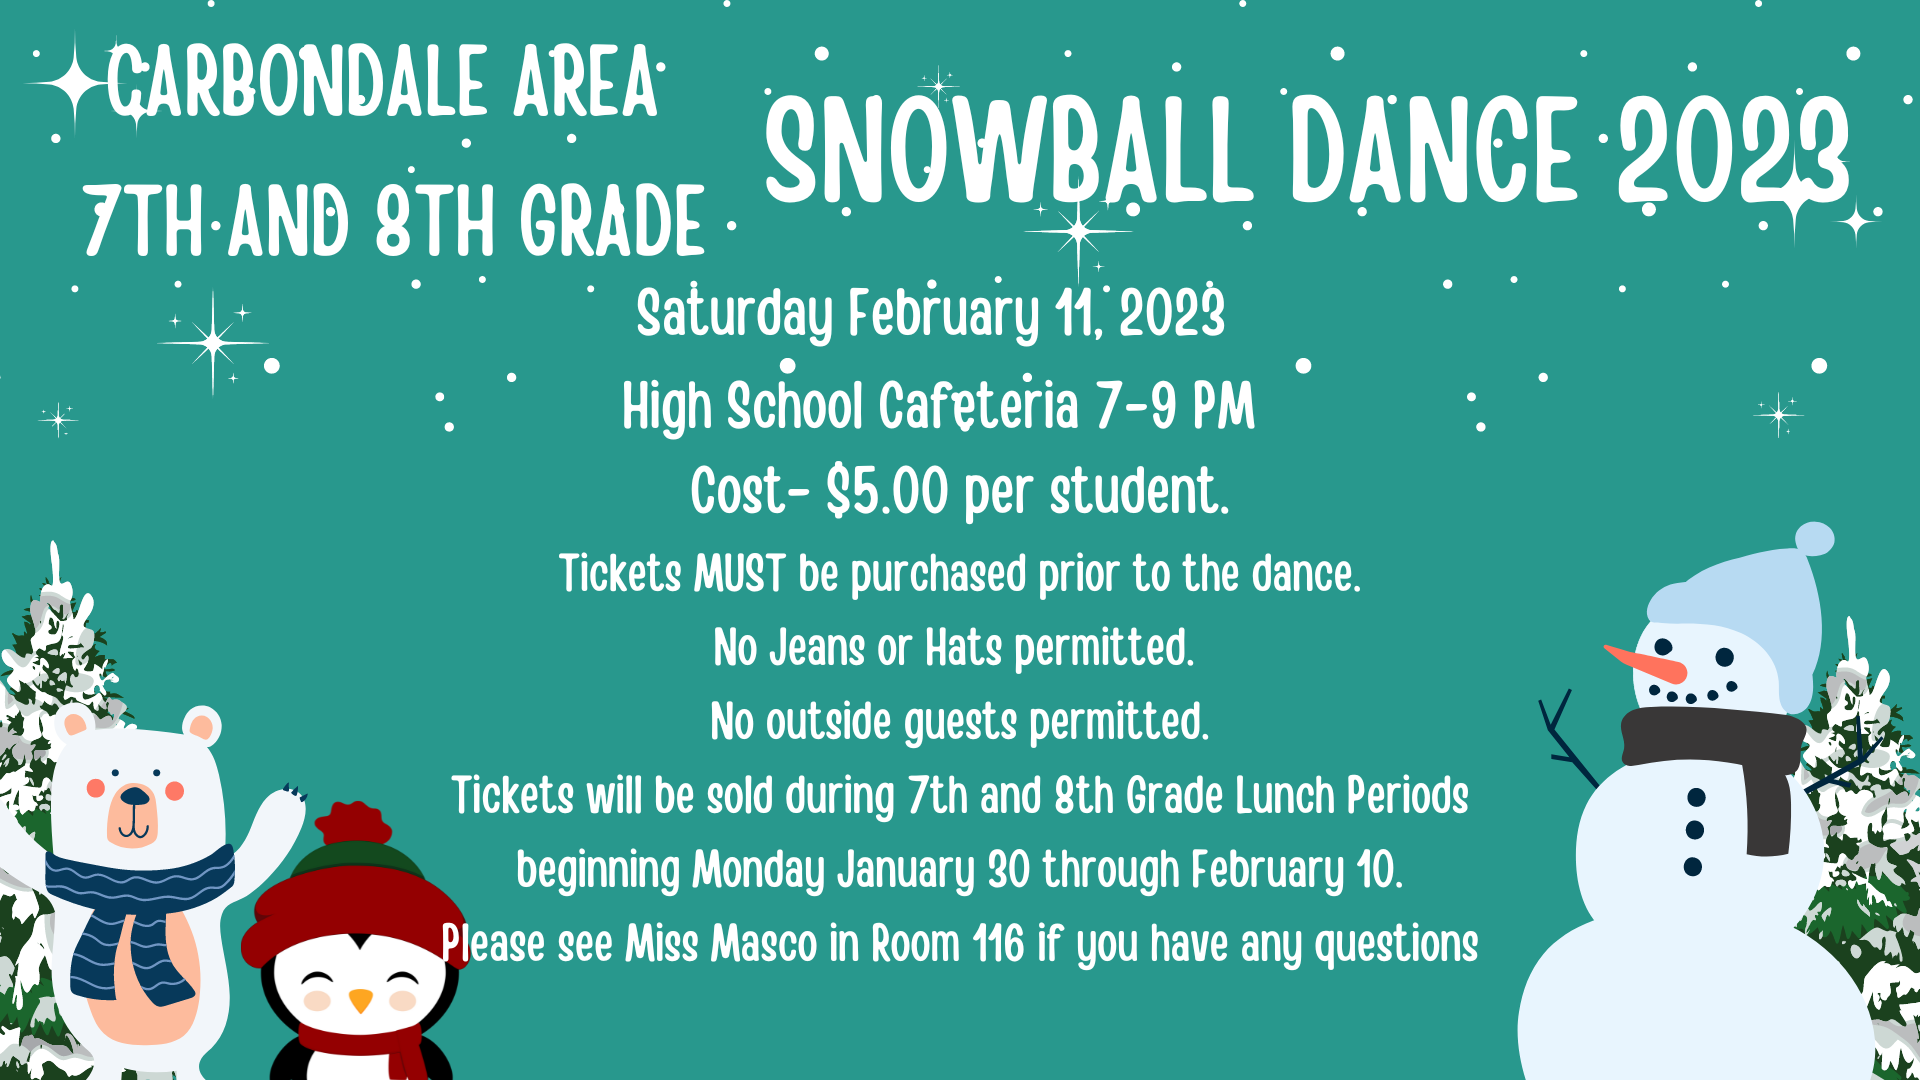 7th and 8th Grade Snowball Dance Information